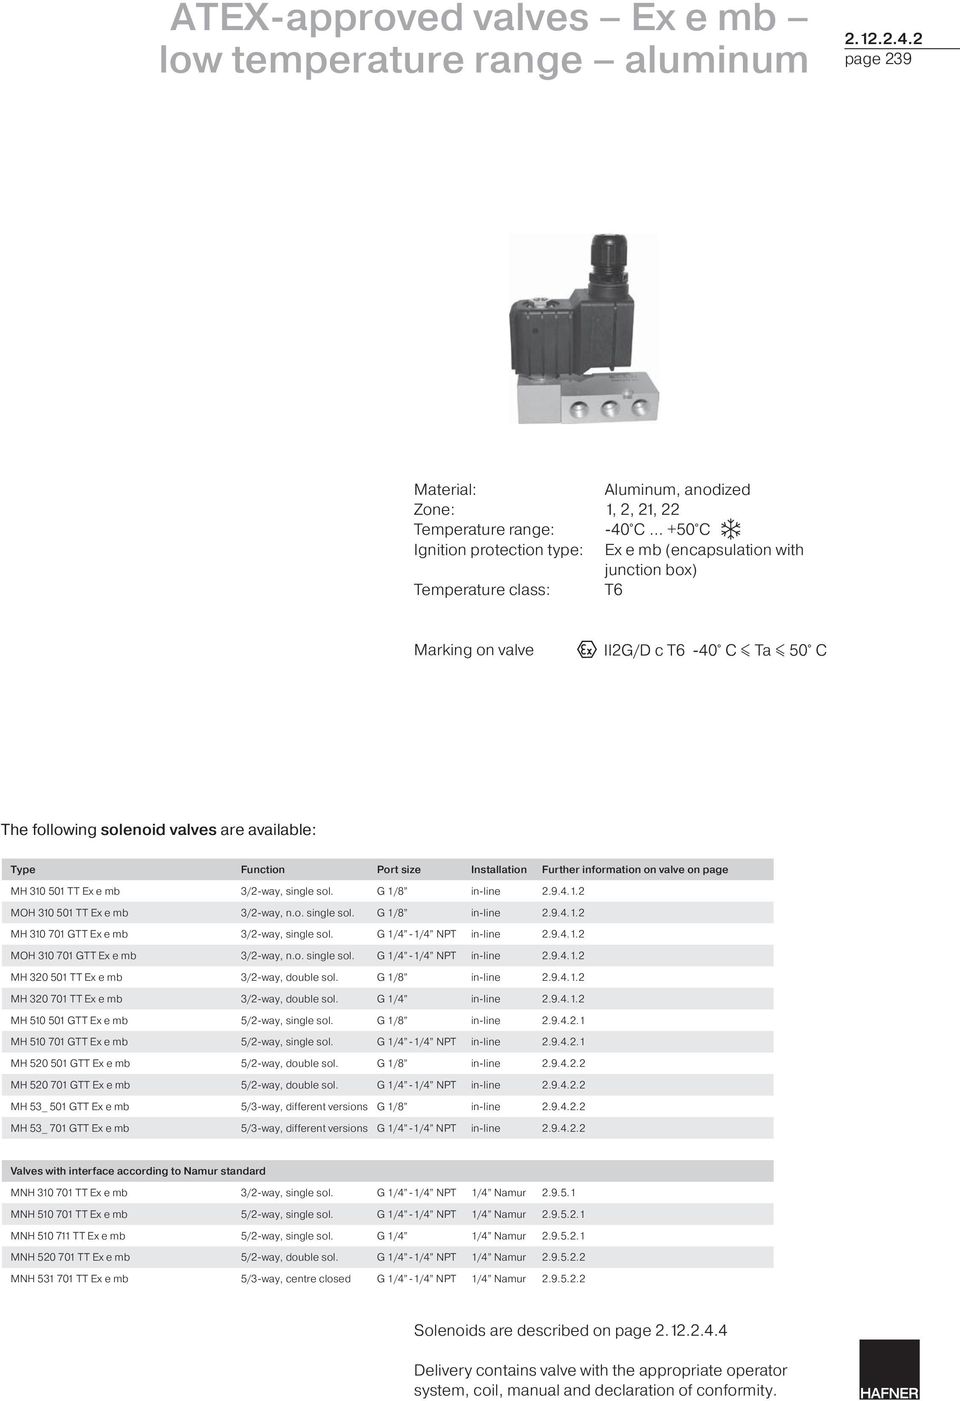 Function Port size Installation Further information on valve on page MH 310 501 TT Ex e mb 3/2-way, single sol. G 1/8 in-line 2.9.4.1.2 MOH 310 501 TT Ex e mb 3/2-way, n.o. single sol. G 1/8 in-line 2.9.4.1.2 MH 310 701 GTT Ex e mb 3/2-way, single sol.